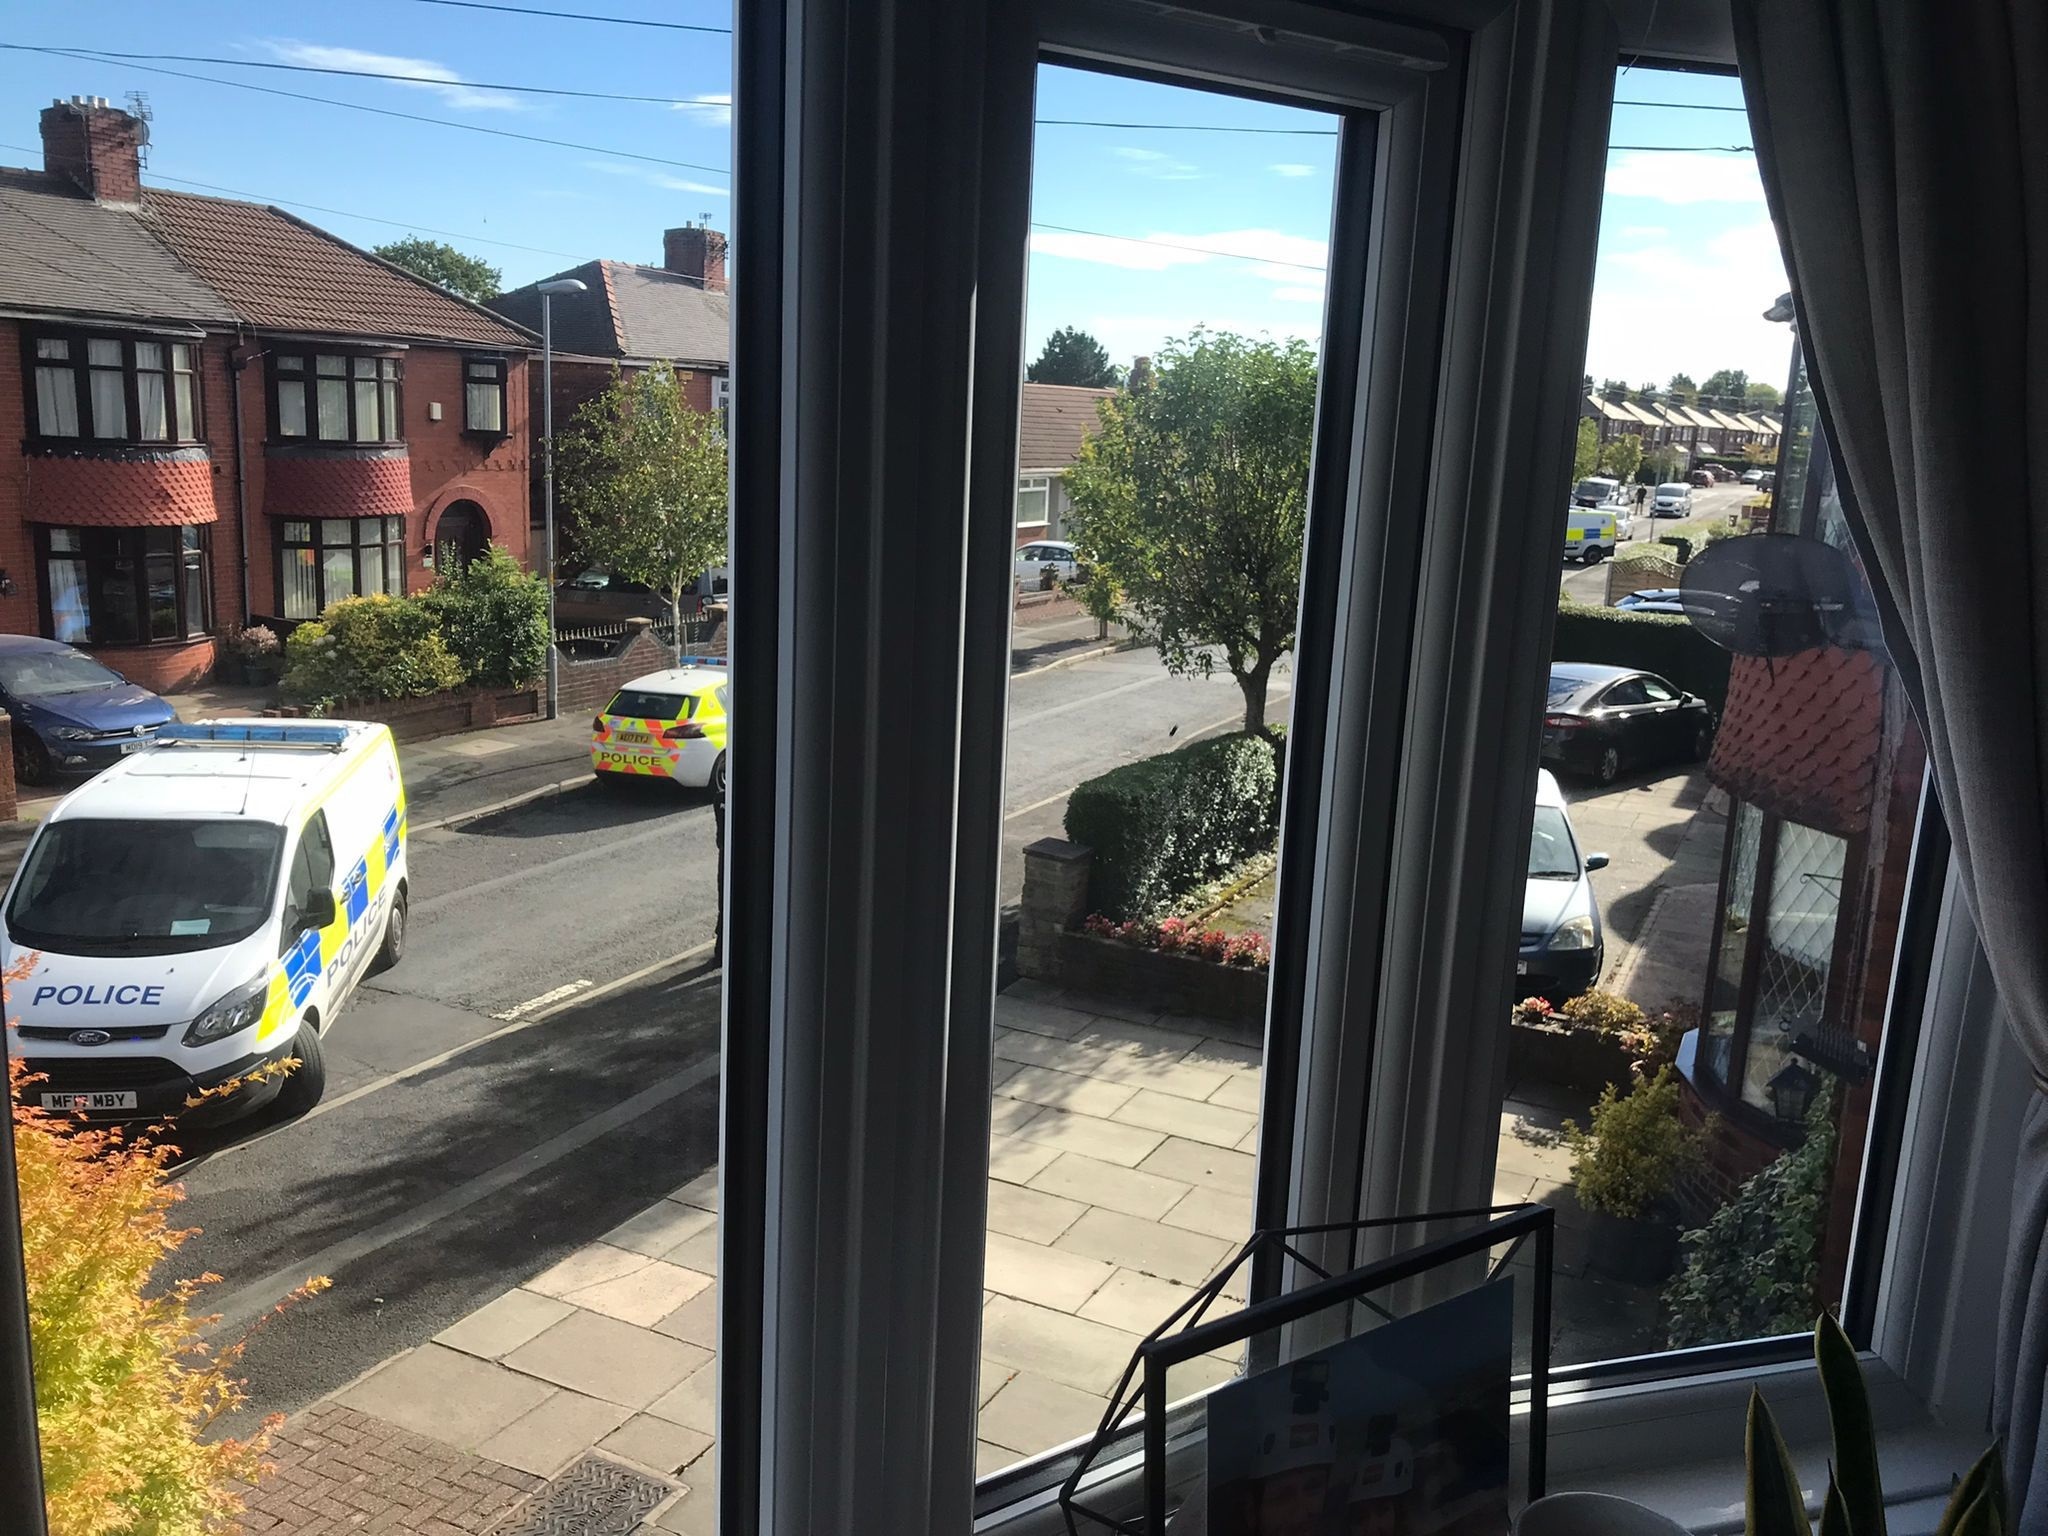 Police on Kew Road in Failsworth on Wednesday